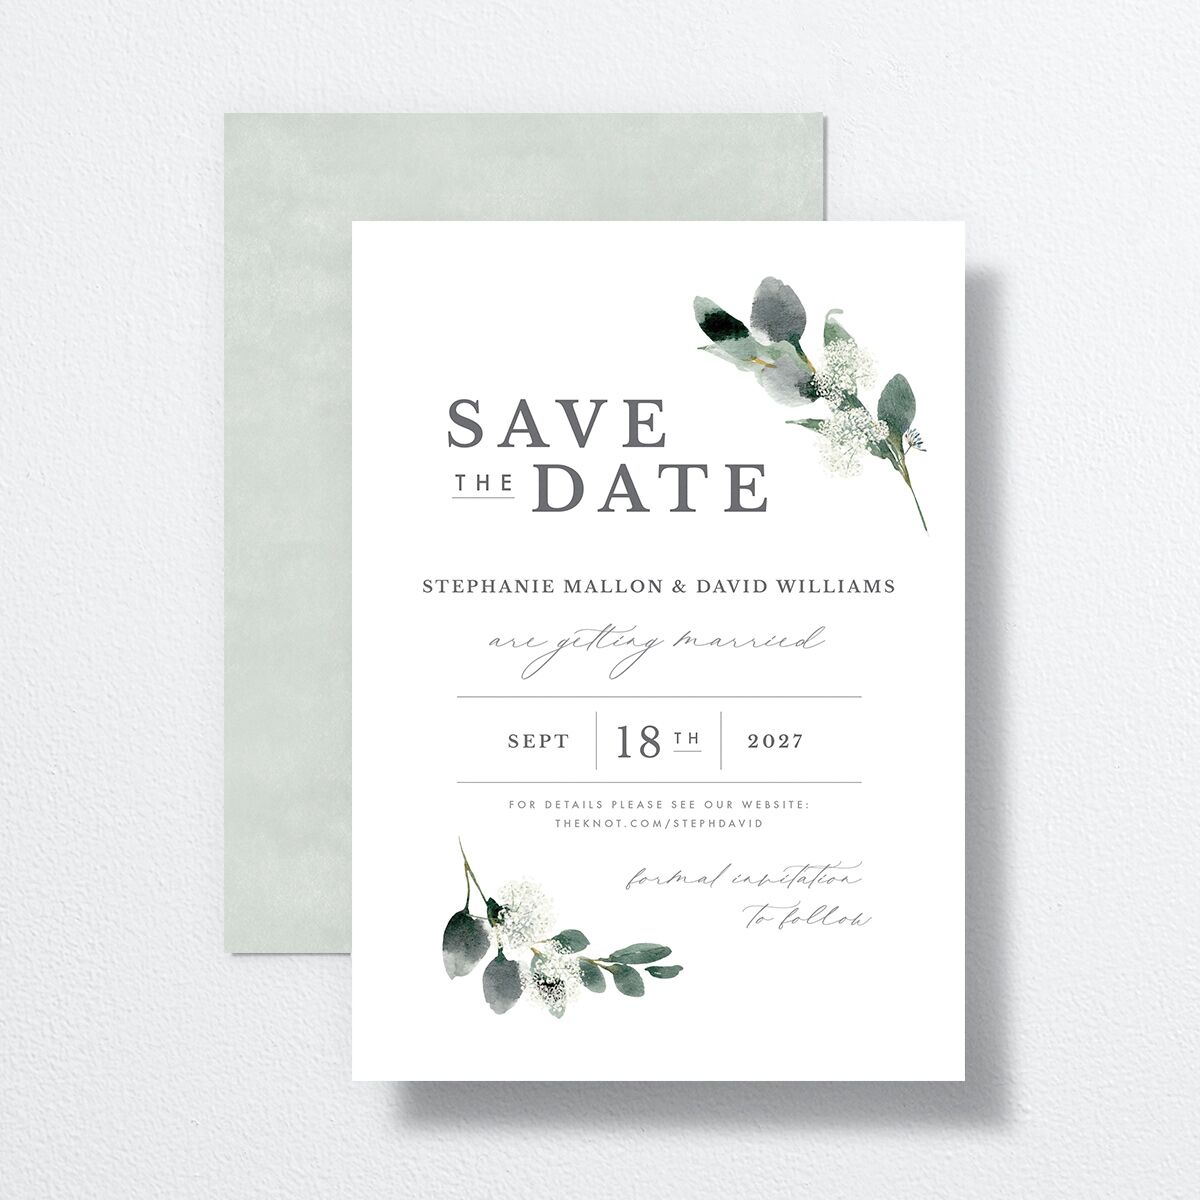 Elegant Greenery Save The Date Cards front-and-back